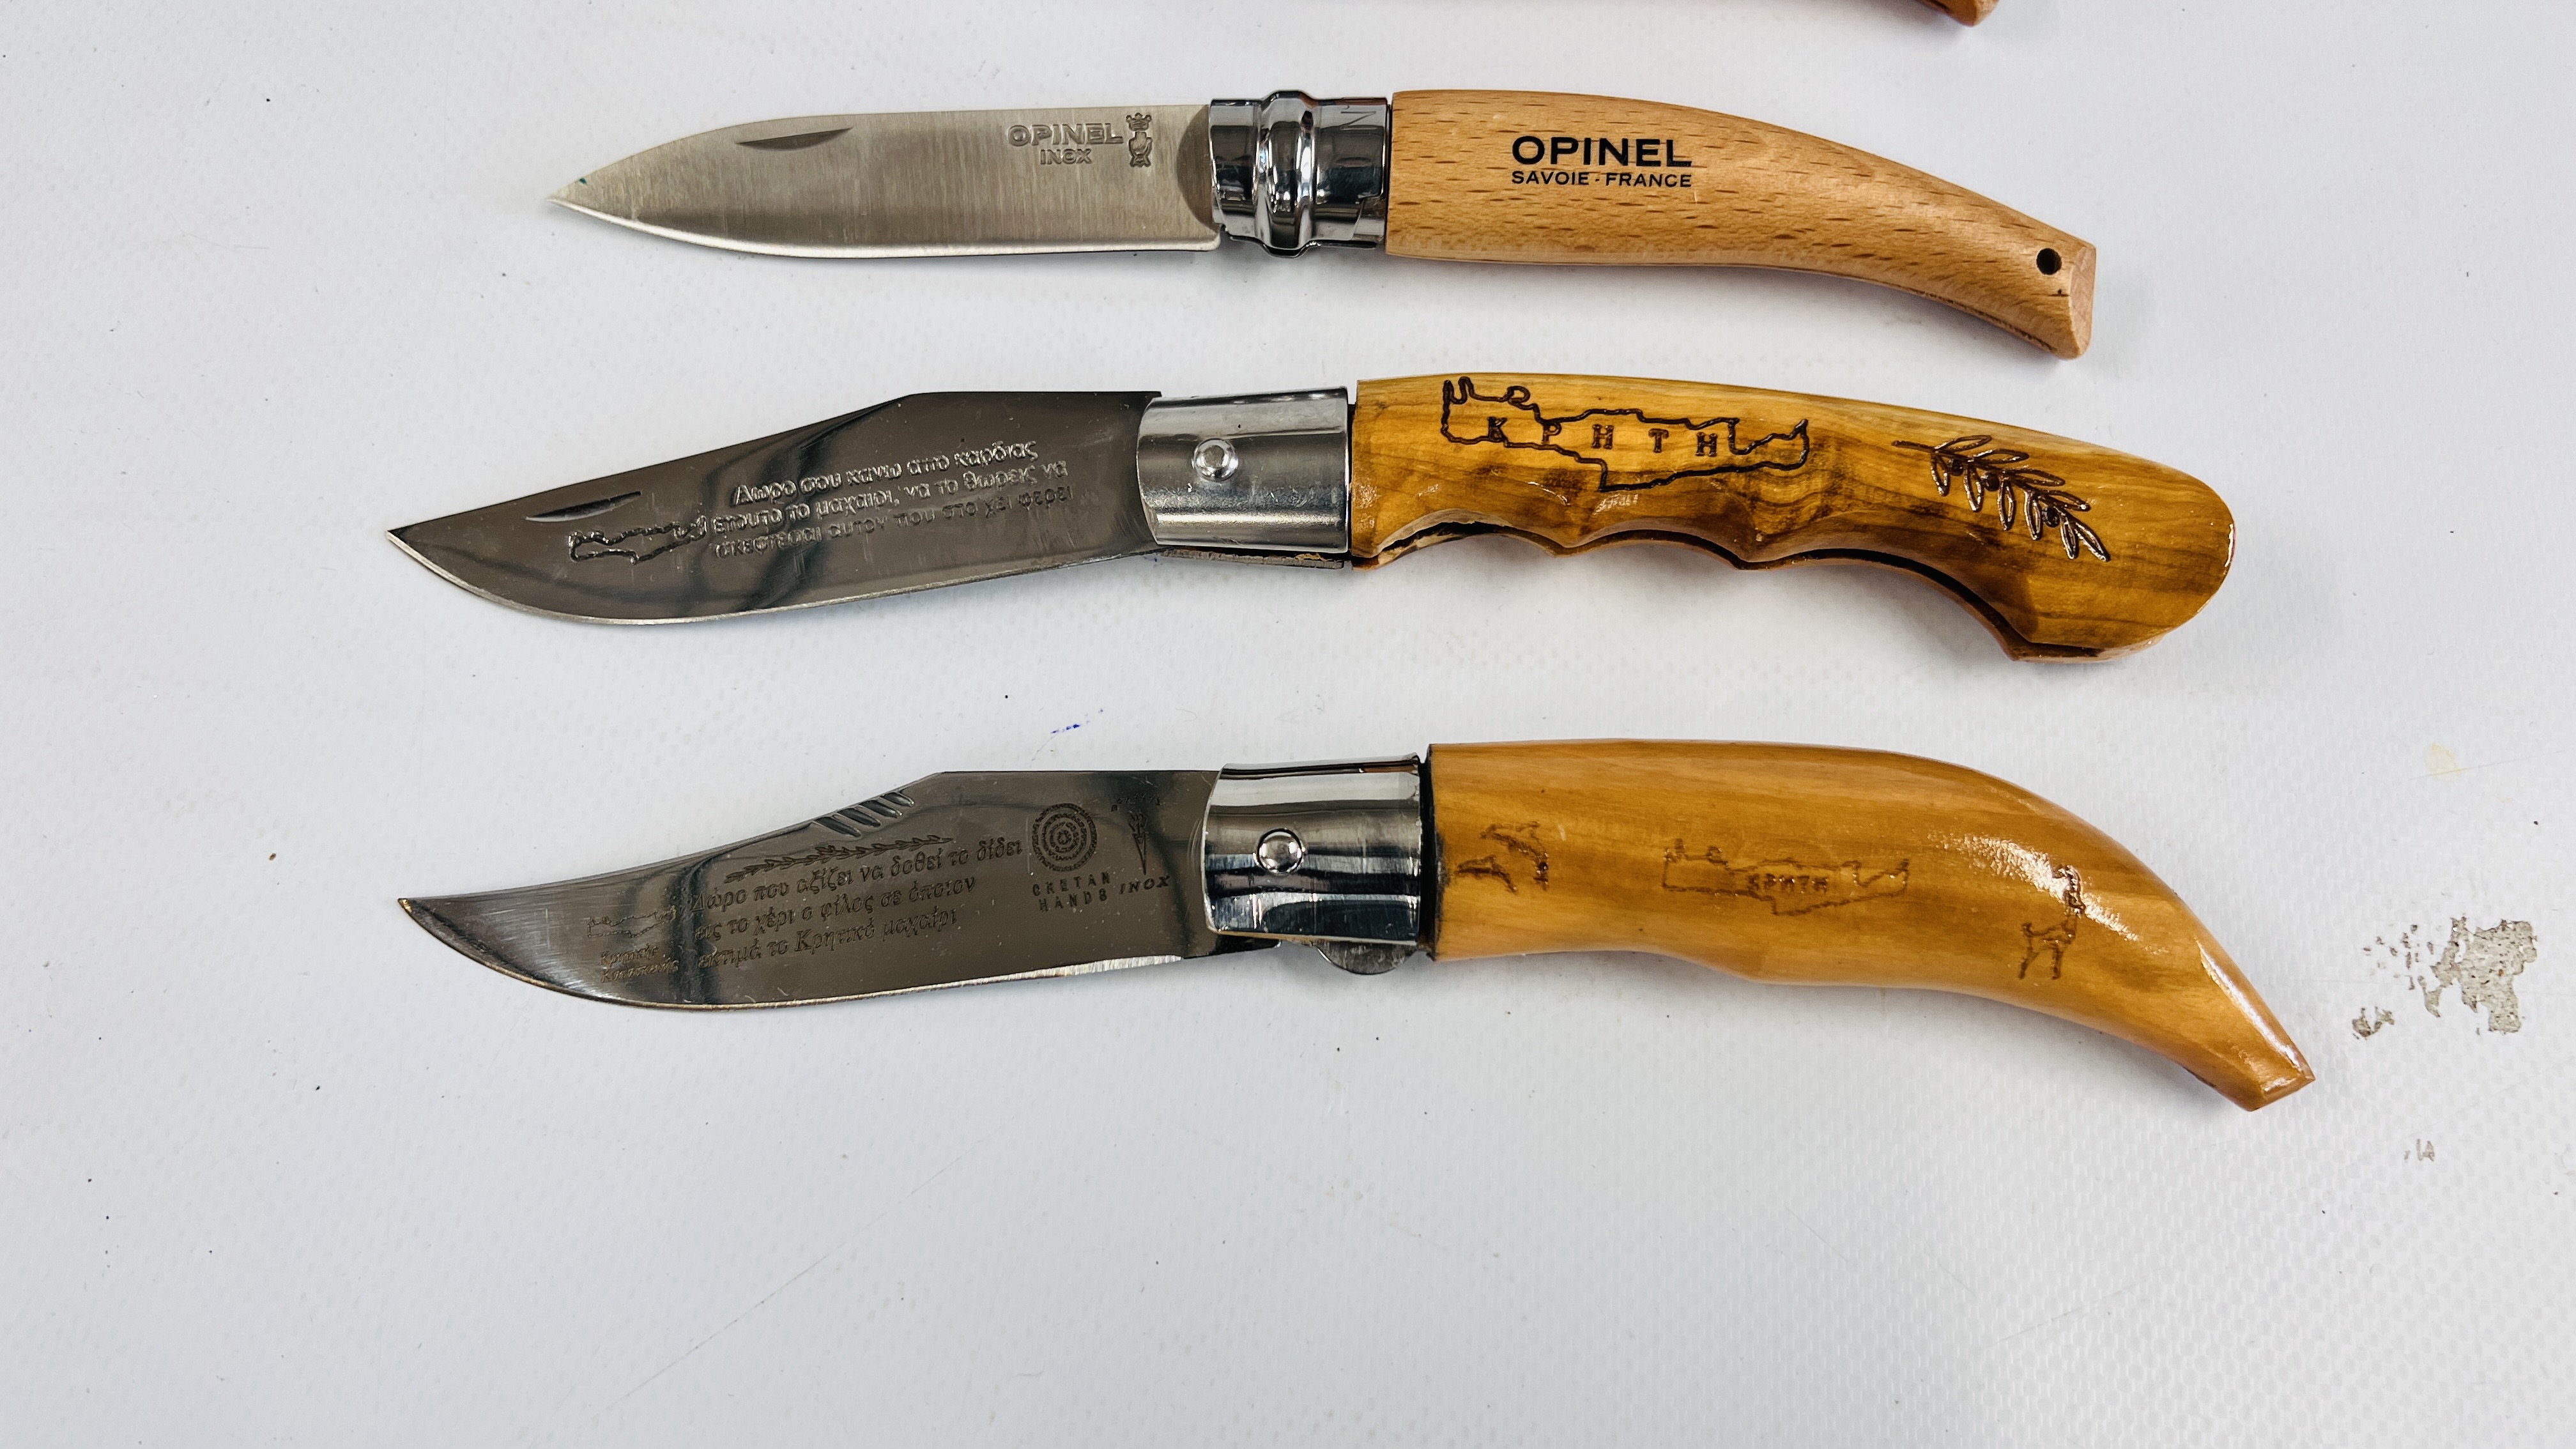 A COLLECTION OF 6 FOLDING POCKET KNIVES TO INCLUDE OPINEL CARBONE NO. - Image 4 of 4